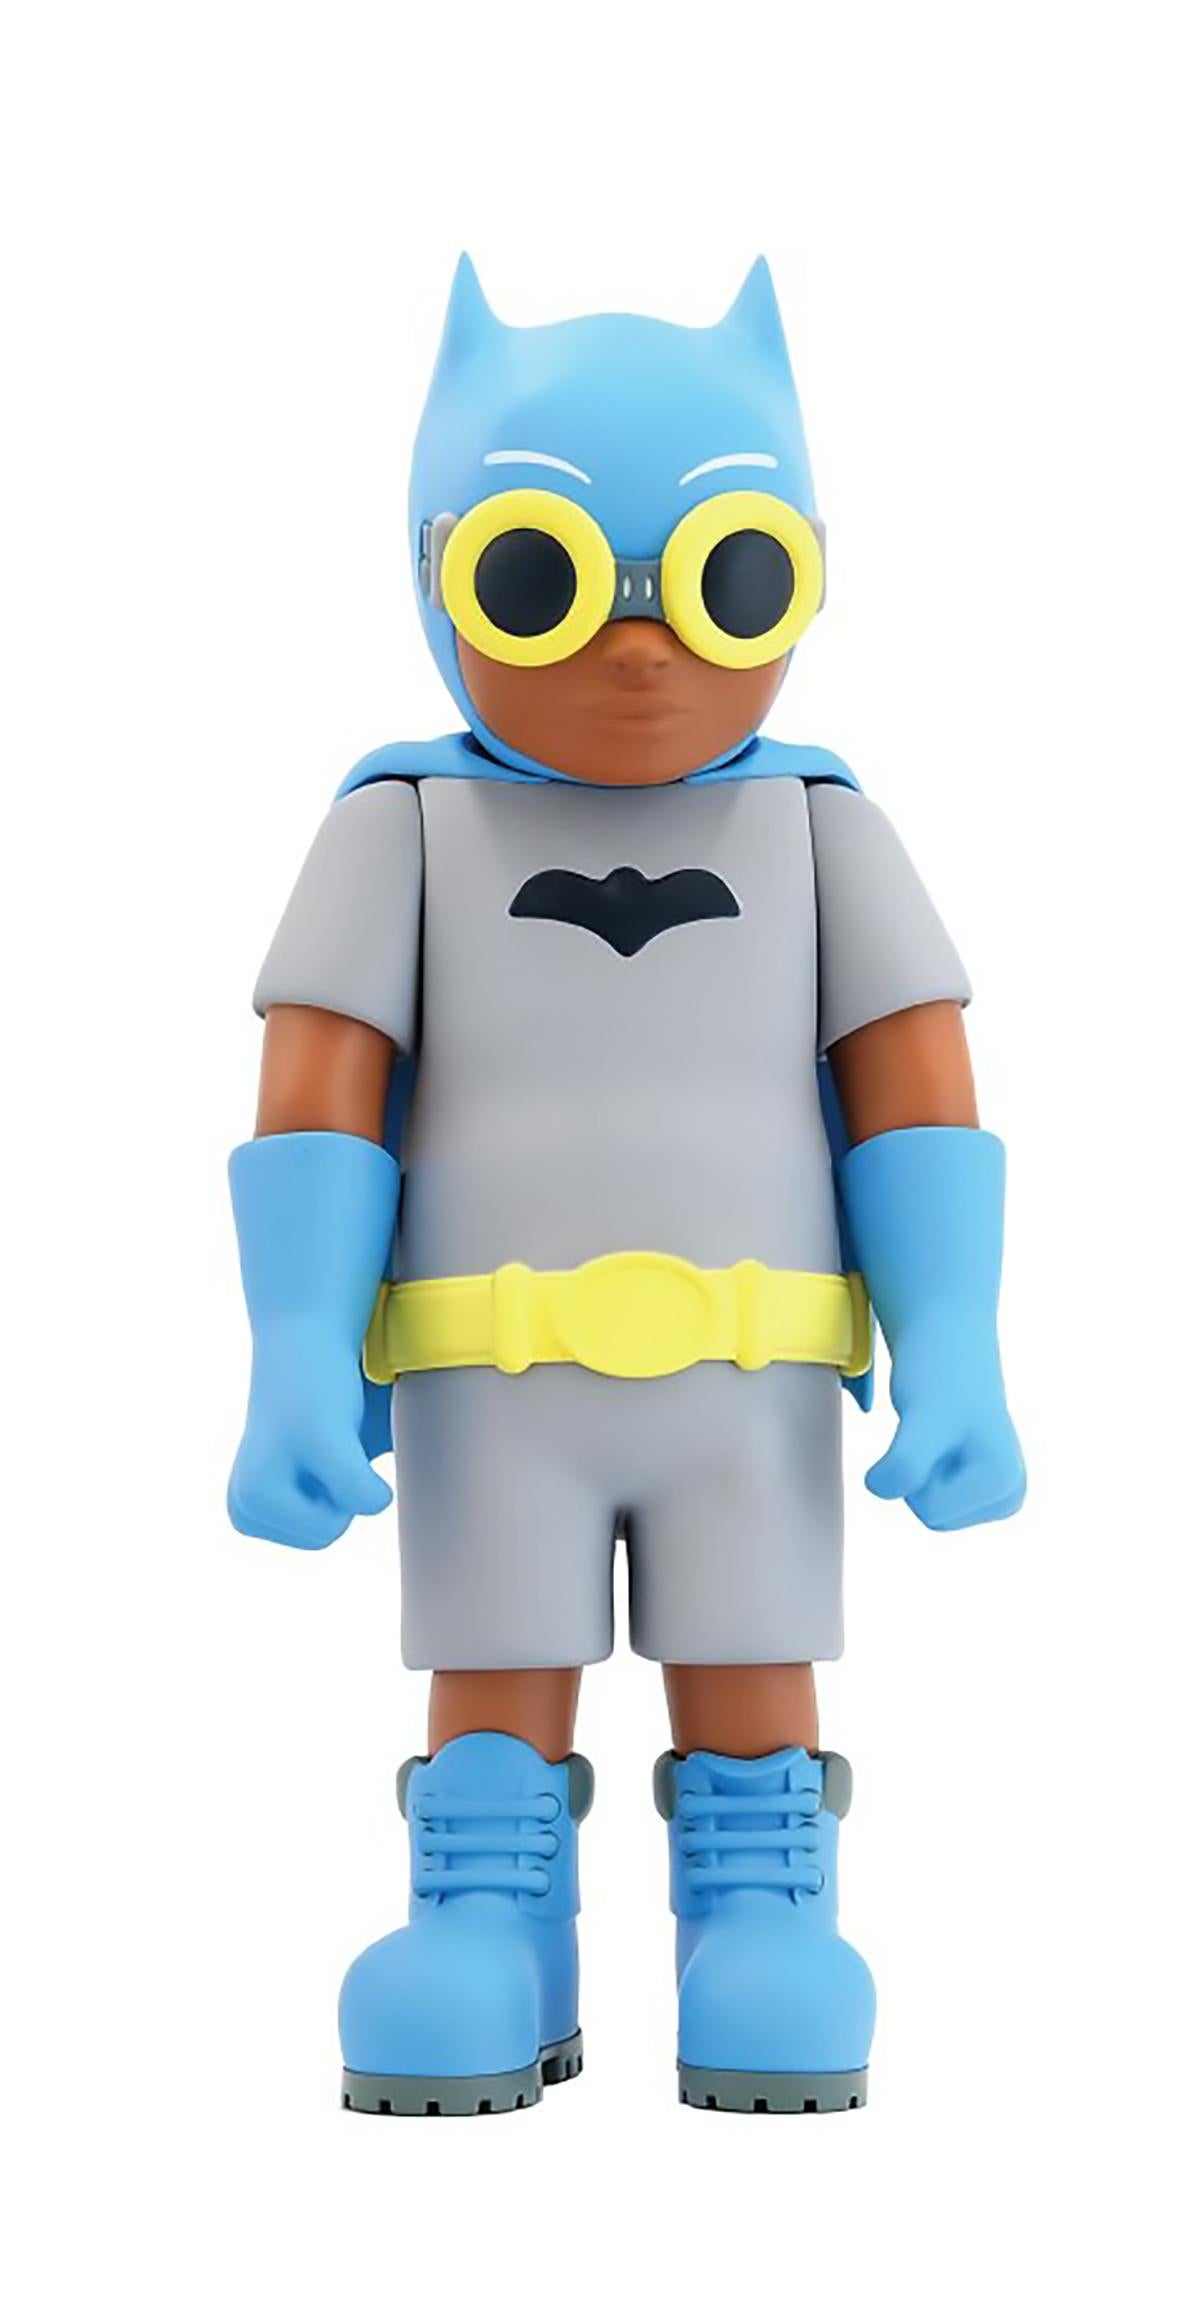 Hebru Brantley Flynamic Duo 66' (set of 2 individual works)/Hebru Brantley Batboy & Sparrow:

Hebru Brantley’s highly collectible take on the caped crusader and his heroic sidekick brilliantly inspired by the original 1960's Batman & Robin